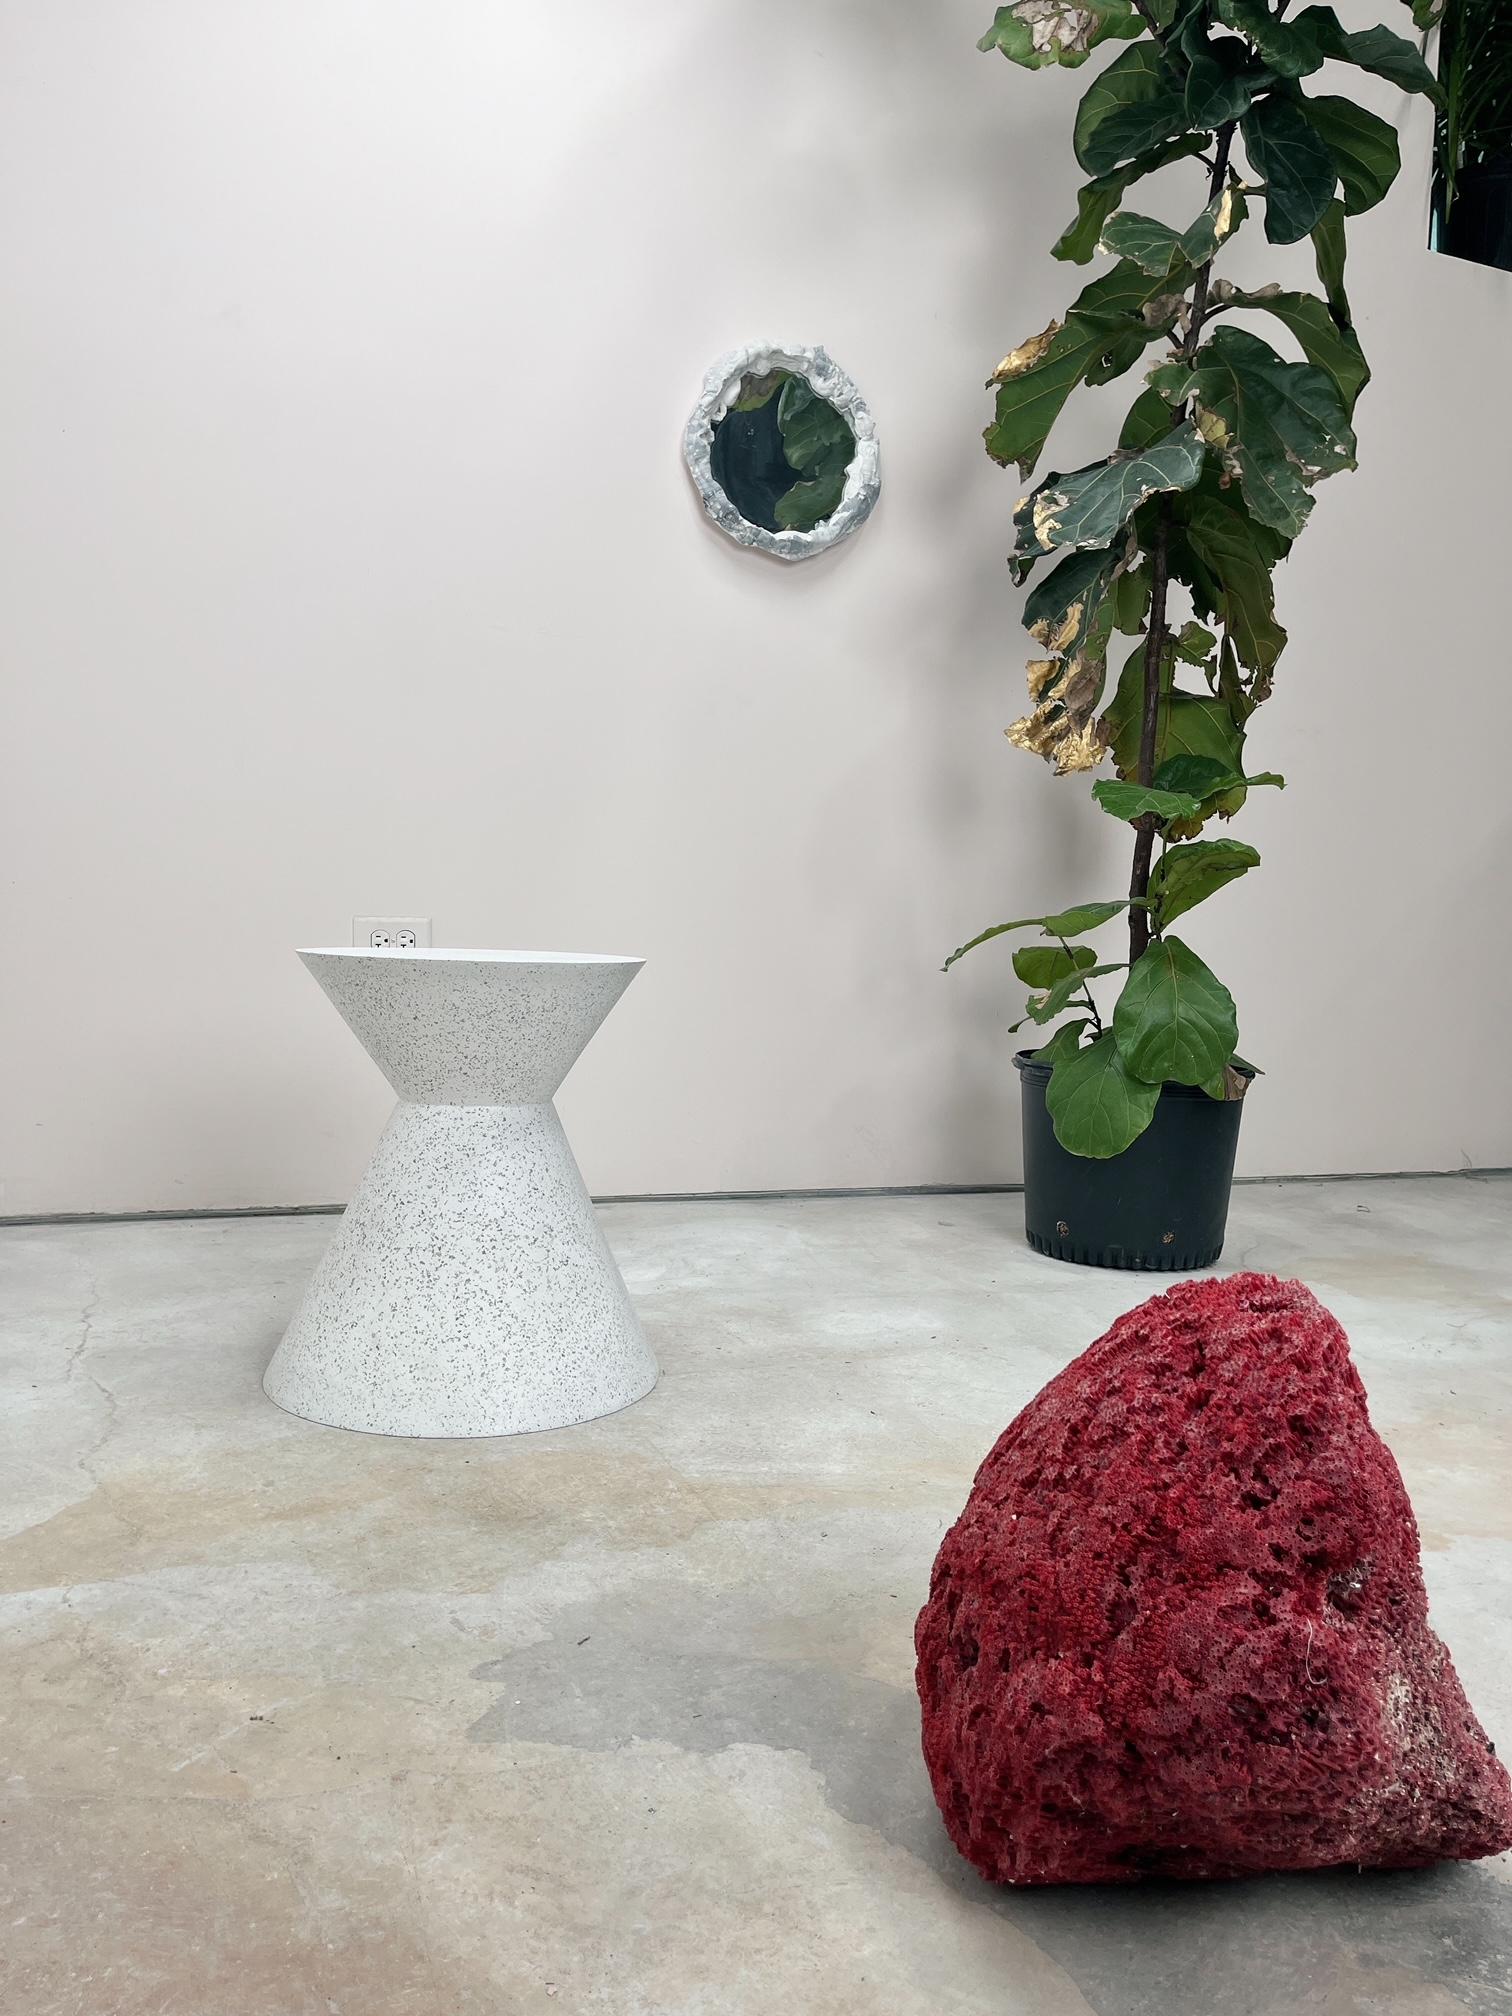 A minimalist’s take on erupting volcanoes, the Kona Side Table brings sophistication and conversation to any environment.

Dimensions: Diameter 14 in. (36 cm), height 18 in. (46 cm). Weight 20 lbs. (9 kg). No assembly required.

Finish color